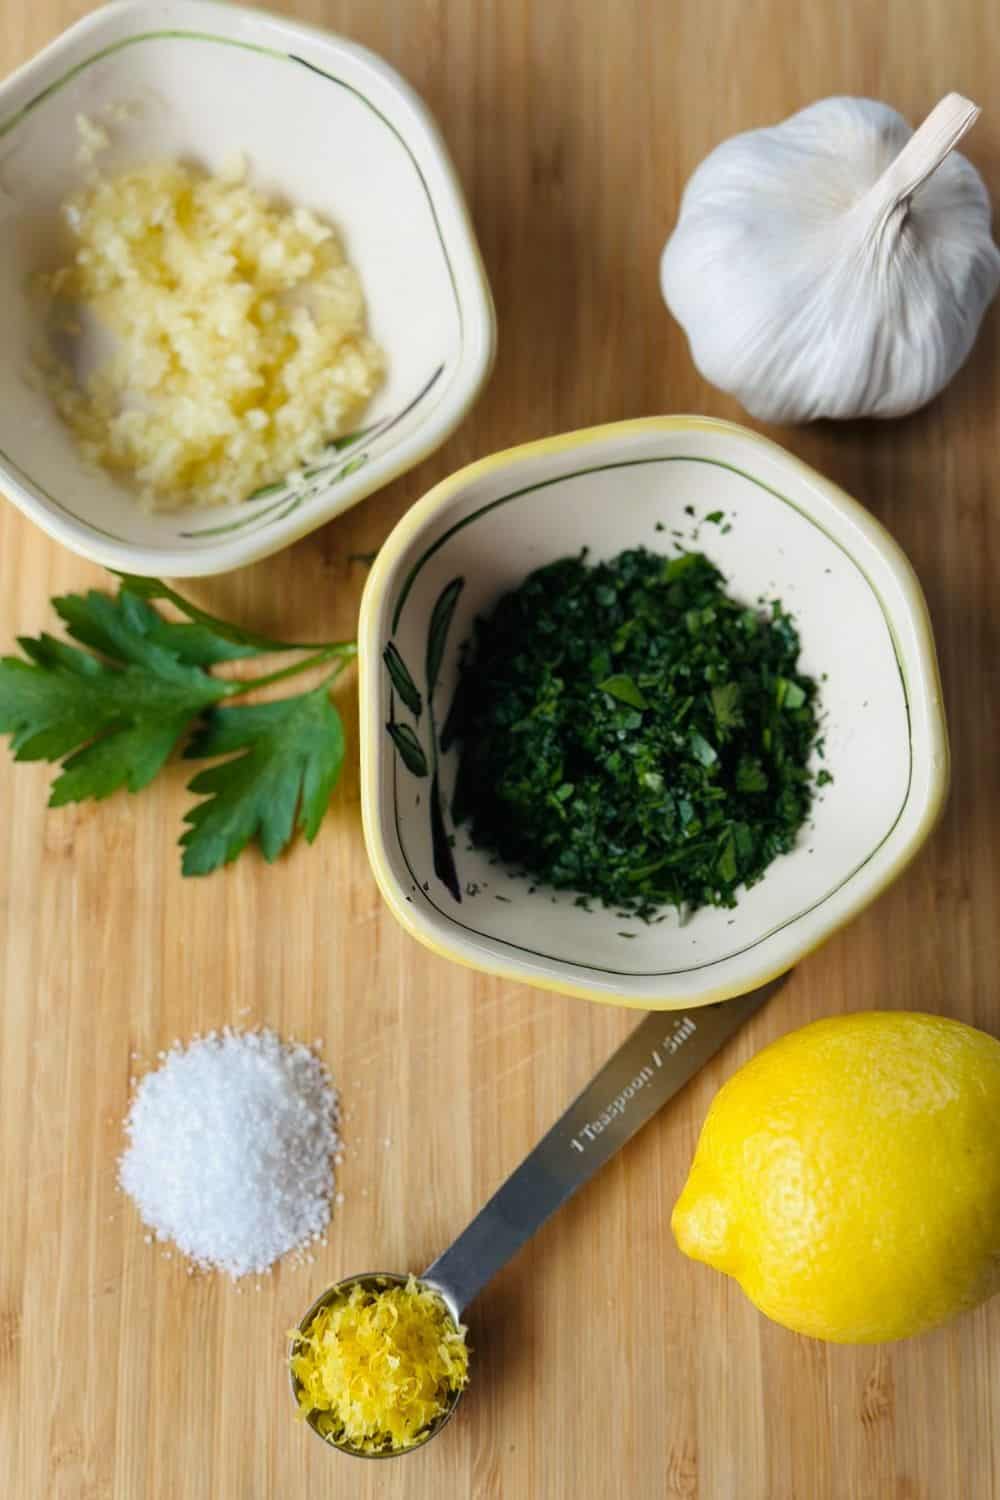 Wooden cutting board containing all the ingredients required for this garlic herb butter recipe.